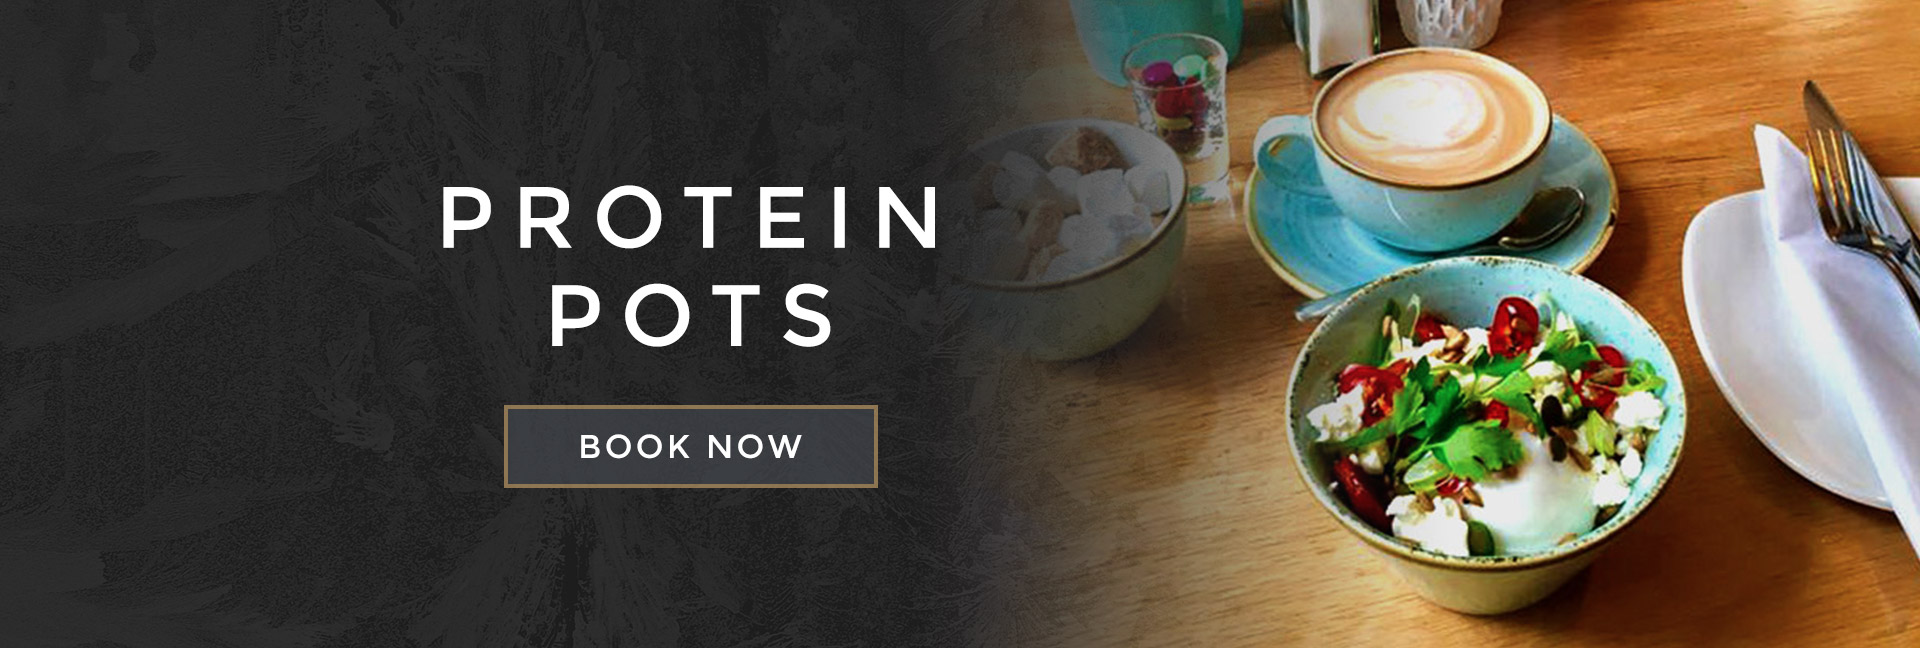 Protein pots at All Bar One Harrogate - Book your table